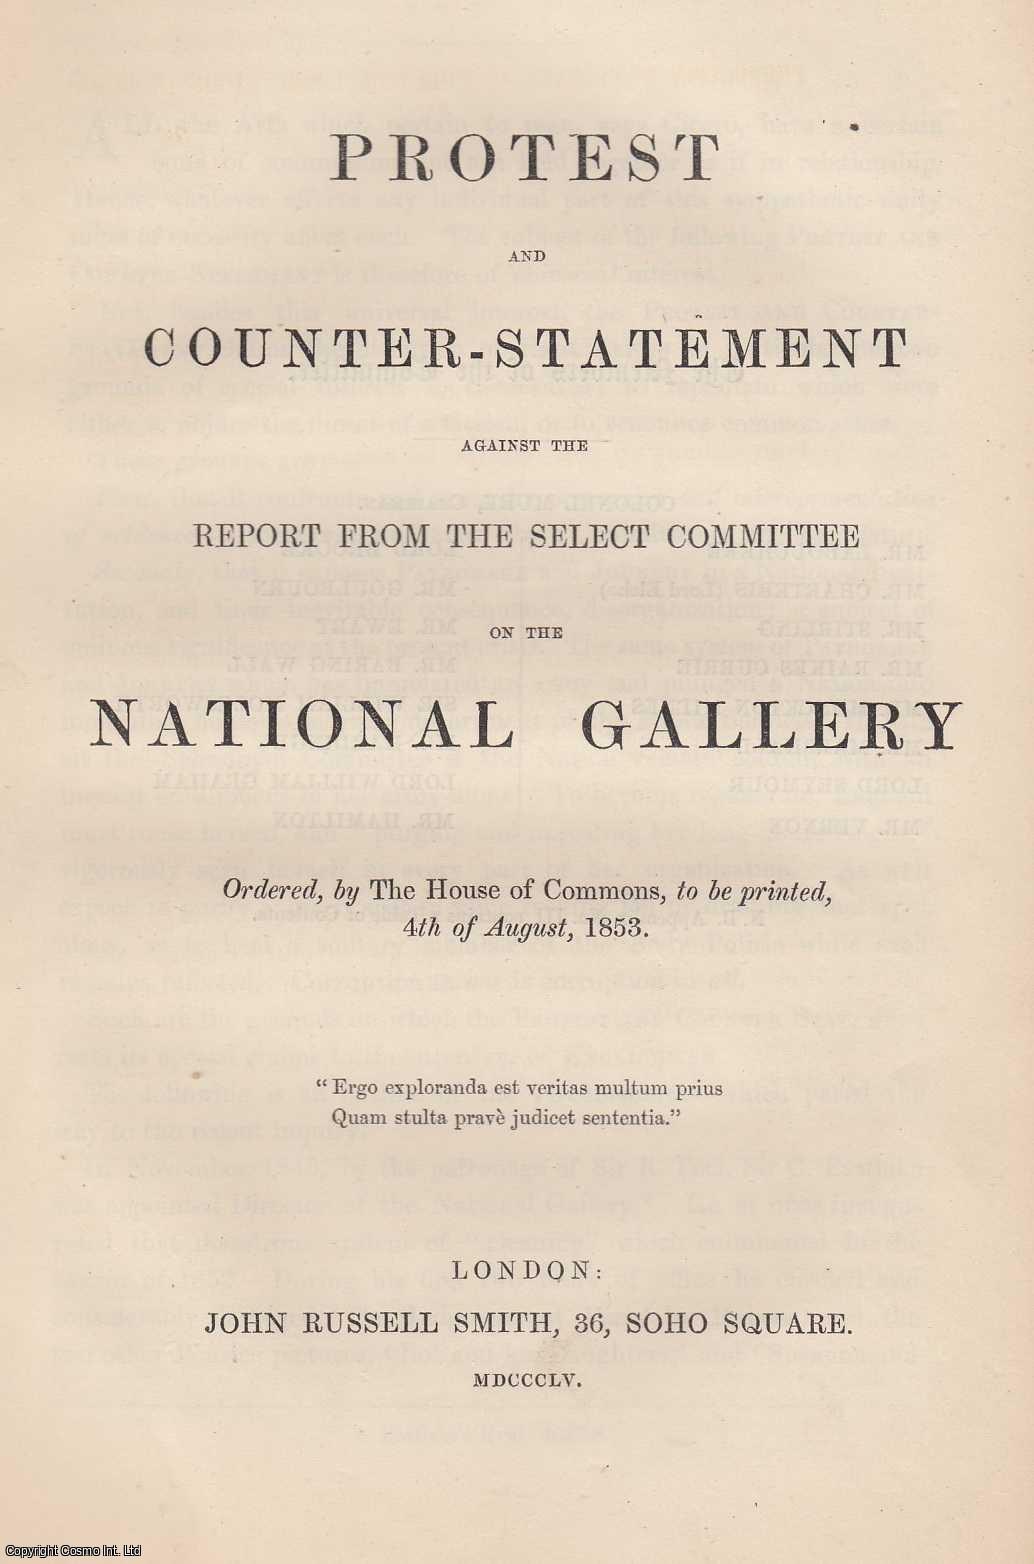 No Author Stated - [1855 National Gallery] Protest and Counter Statement against the report from the Select Committee on the National Gallery. Ordered, by the House of Commons, to be printed, 4th of August, 1853.